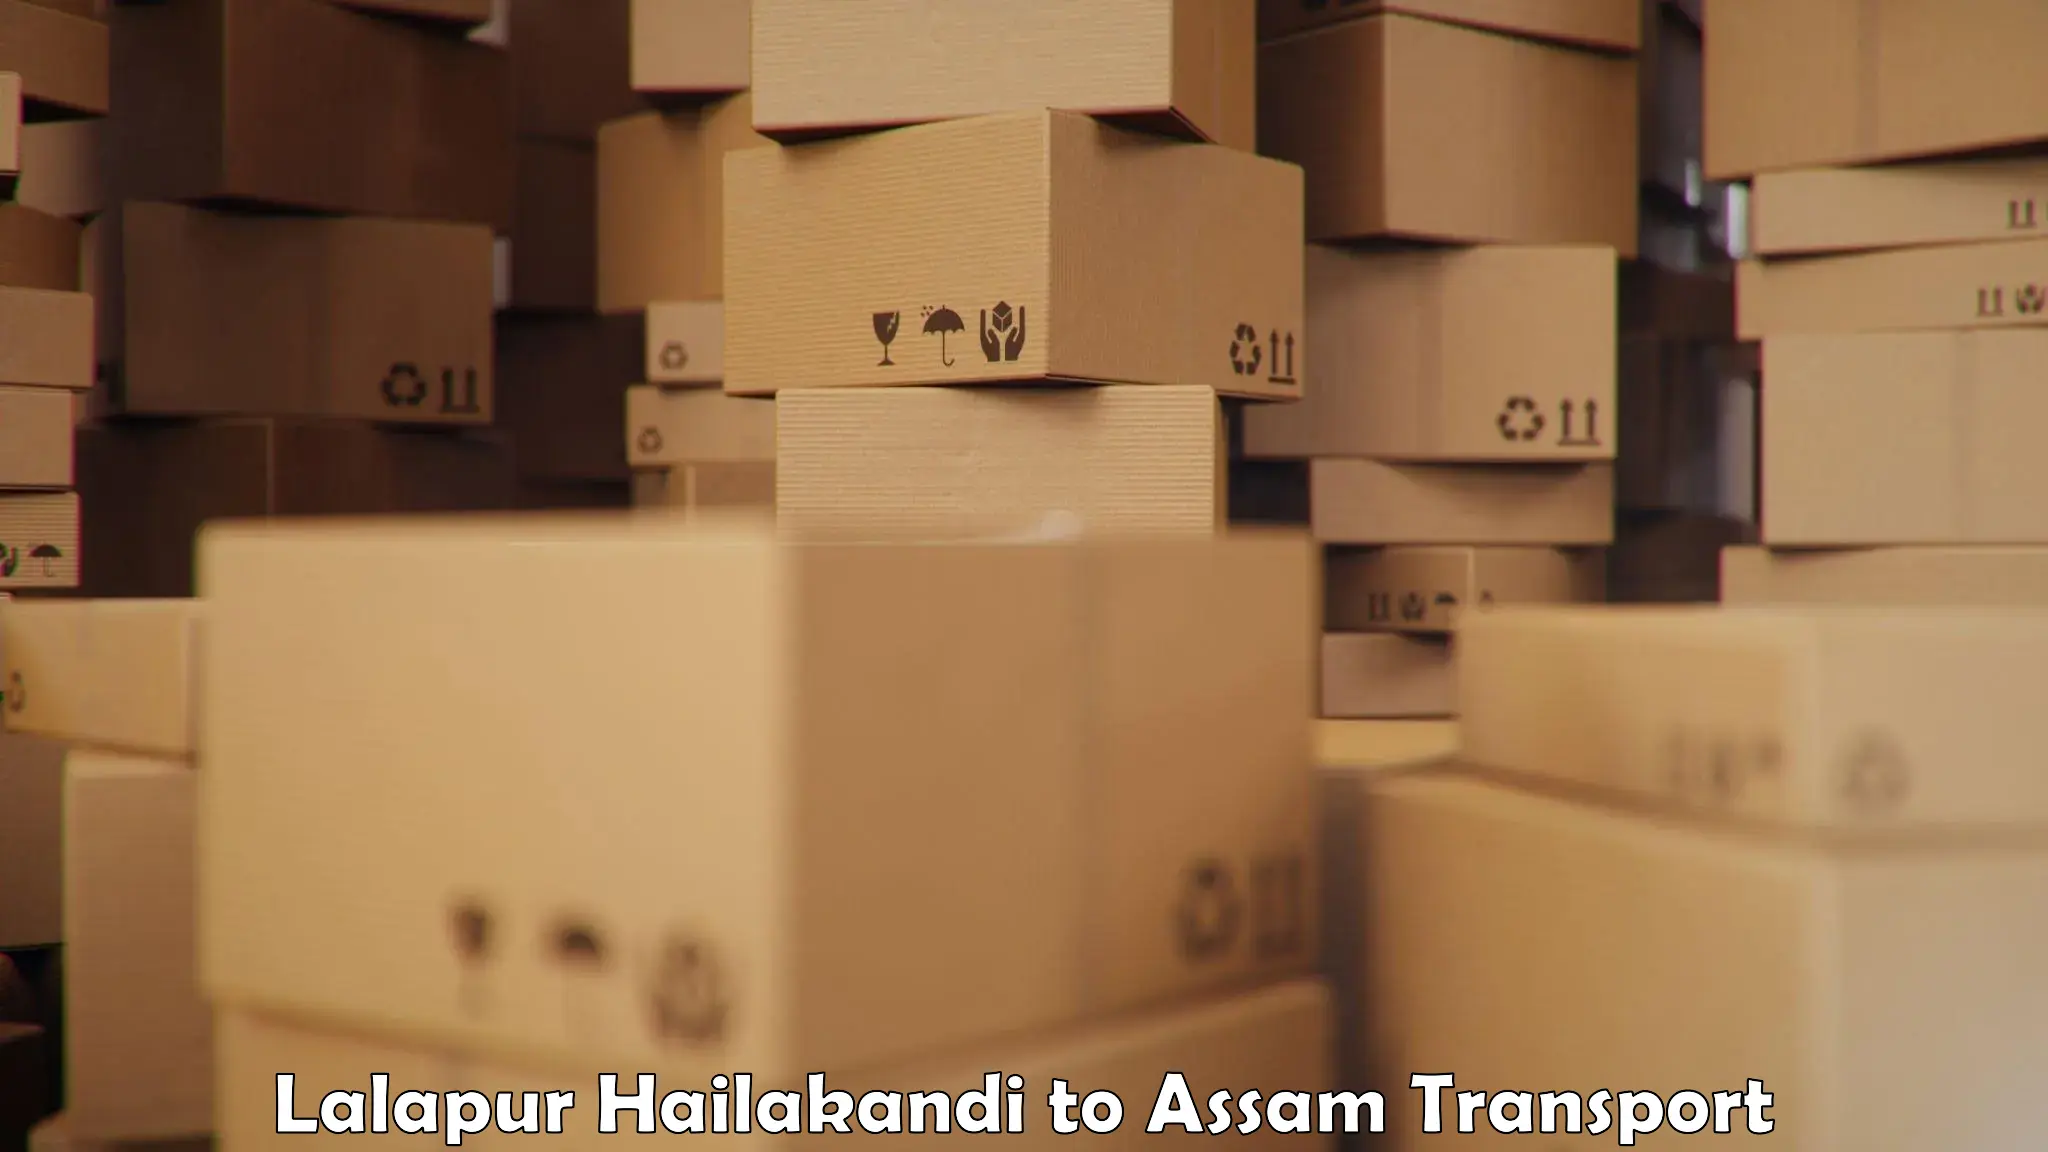 Package delivery services Lalapur Hailakandi to Kamrup